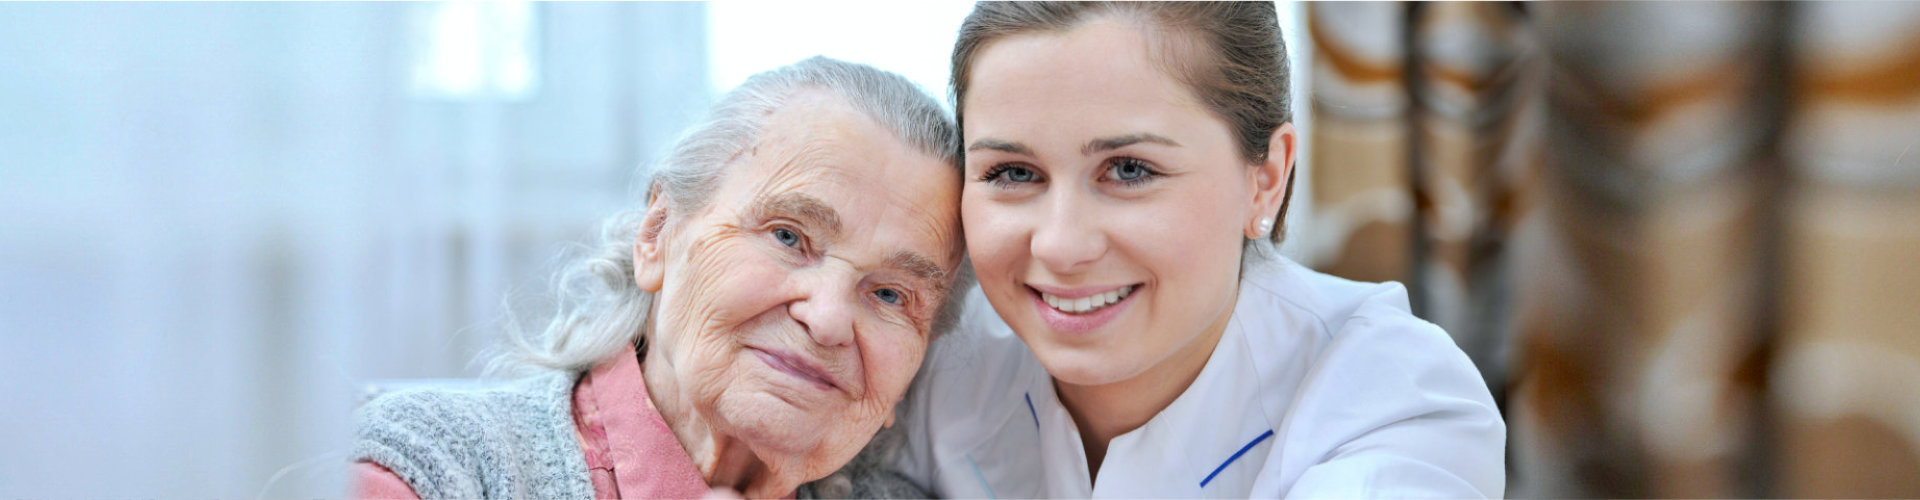 Resources | Home Care in Philadelphia, PA | Humane Home Care ...